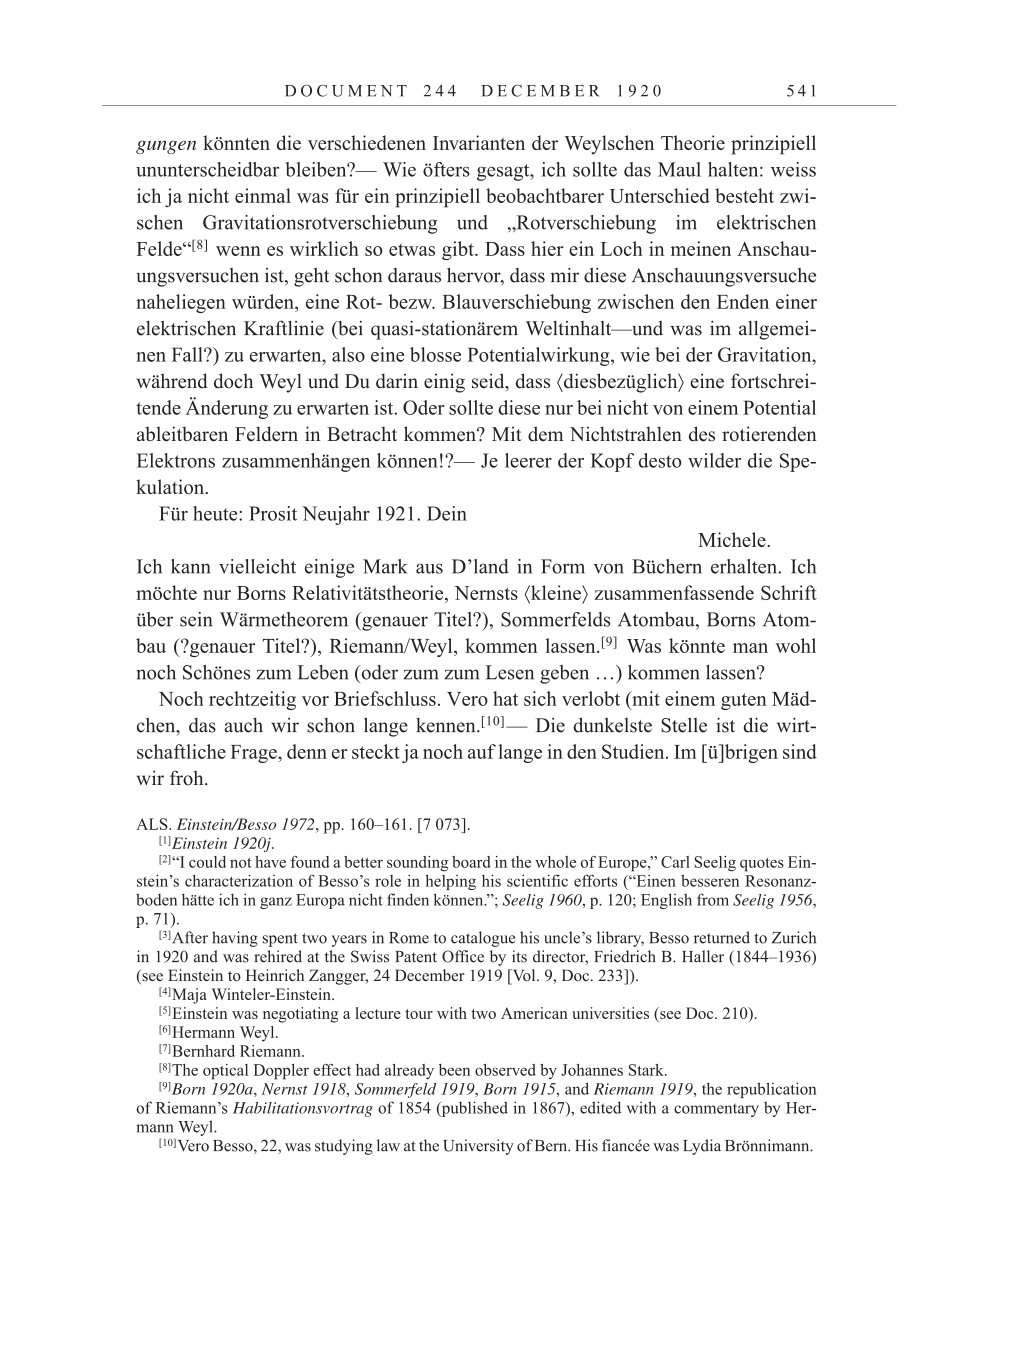 Volume 10: The Berlin Years: Correspondence May-December 1920 / Supplementary Correspondence 1909-1920 page 541